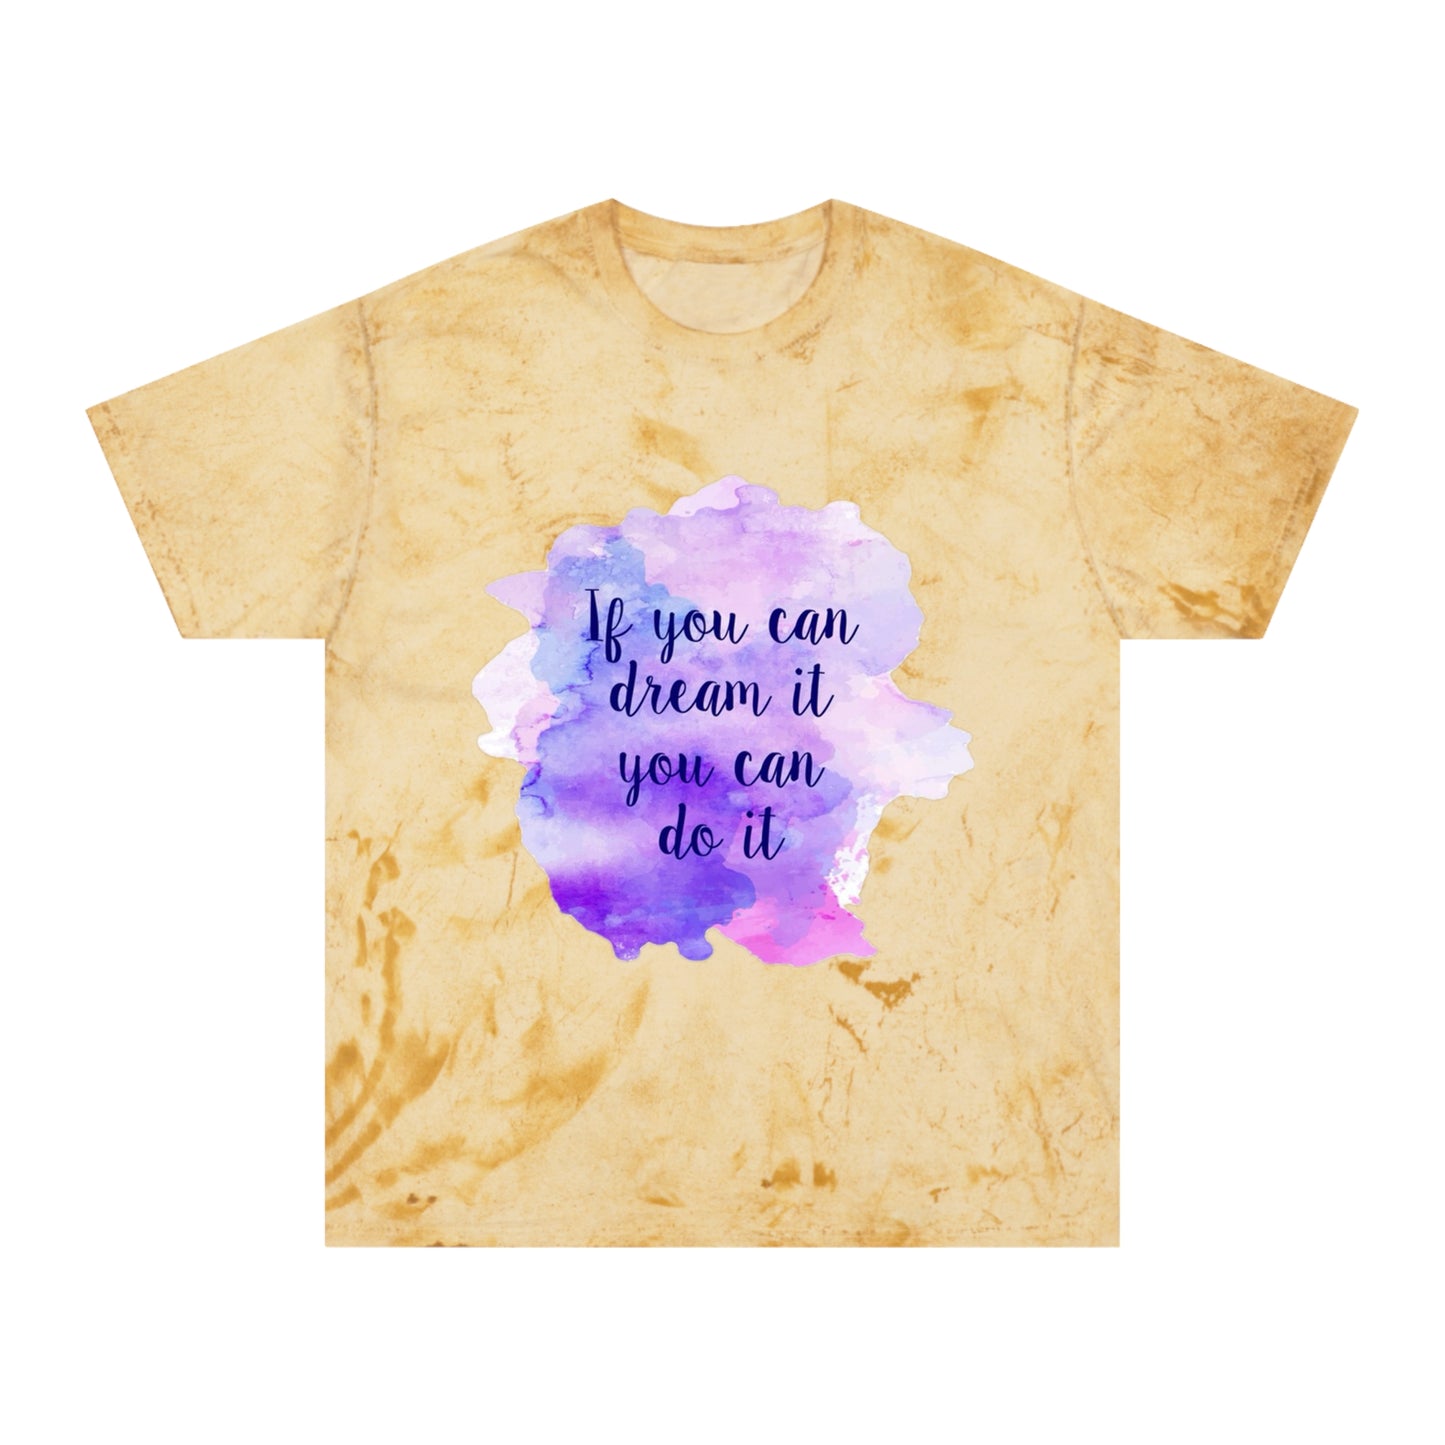 Inclusive Radiance: T-Shirt Infused with Zach in a Box Design